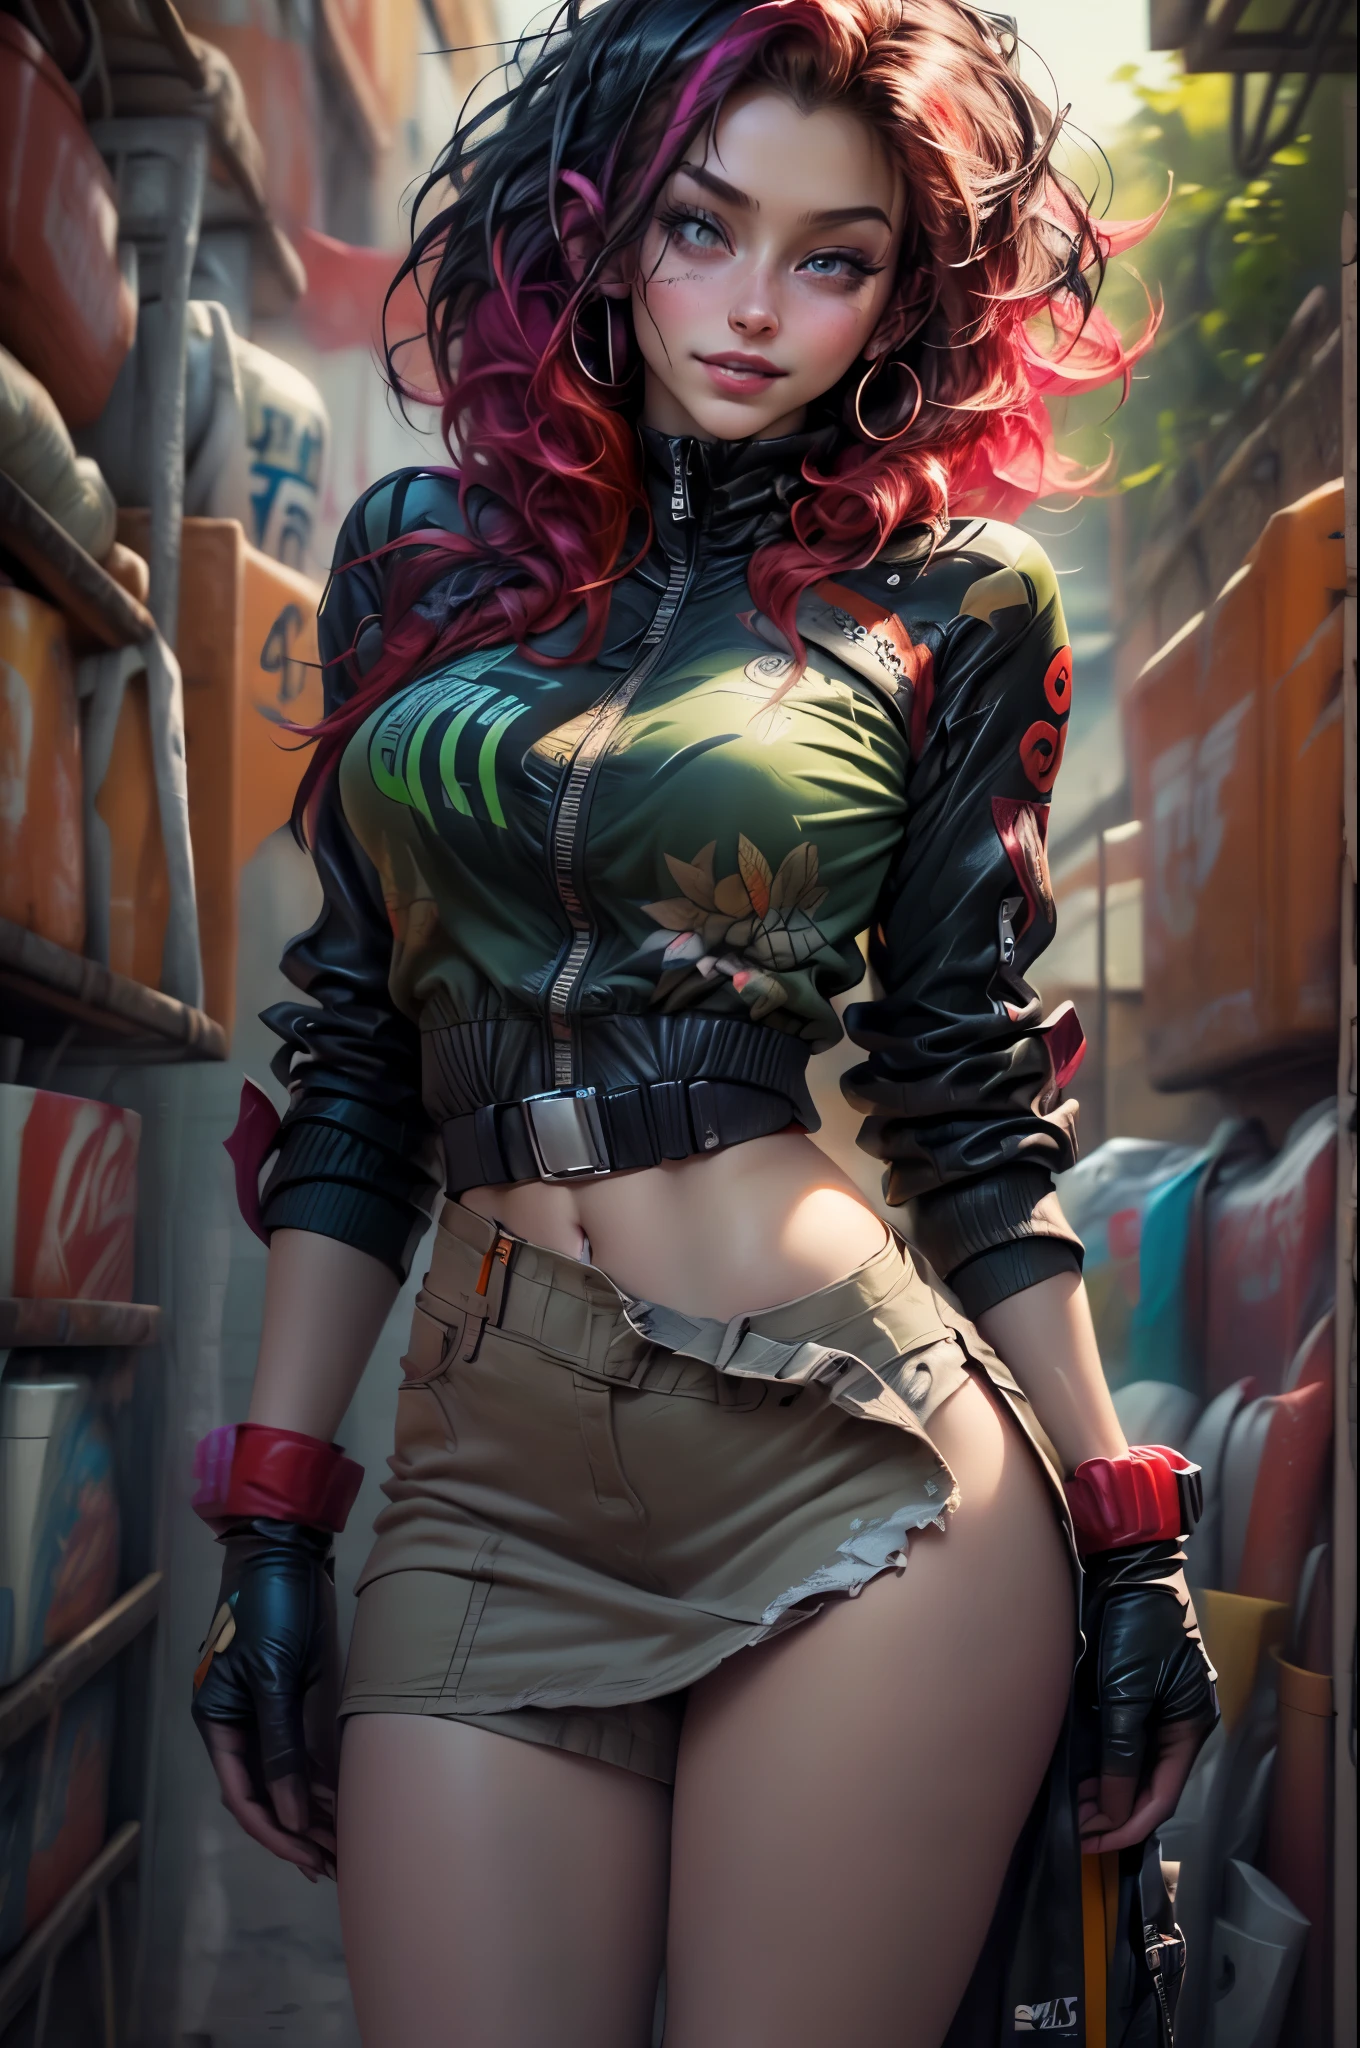 ((long shot:1.6)), Unreal Engine:1.4, Ultra Realistic CG K, Photorealistic:1.4, Skin Texture:1.4, ((artwork 1 young woman full body:1.5)), ((red hair green eyes, full lips and a sensual smile:1.5)), punk-style hairstyle with a shaved side, tattoos, Gatling gun, box, looking at the viewer, dynamic pose, blows, ammunition belt, gloves, large breasts not disproportionate, Shooting , Extremely detailed:1.4, more detailed, optical mix, playful patterns, lively texture, unique visual effect, pink leather mini skirt, pink jacket, masterpiece, ((colors, cyan, green, pink, brown: 1.2)), ( (8k realistic digital art.)), 32k